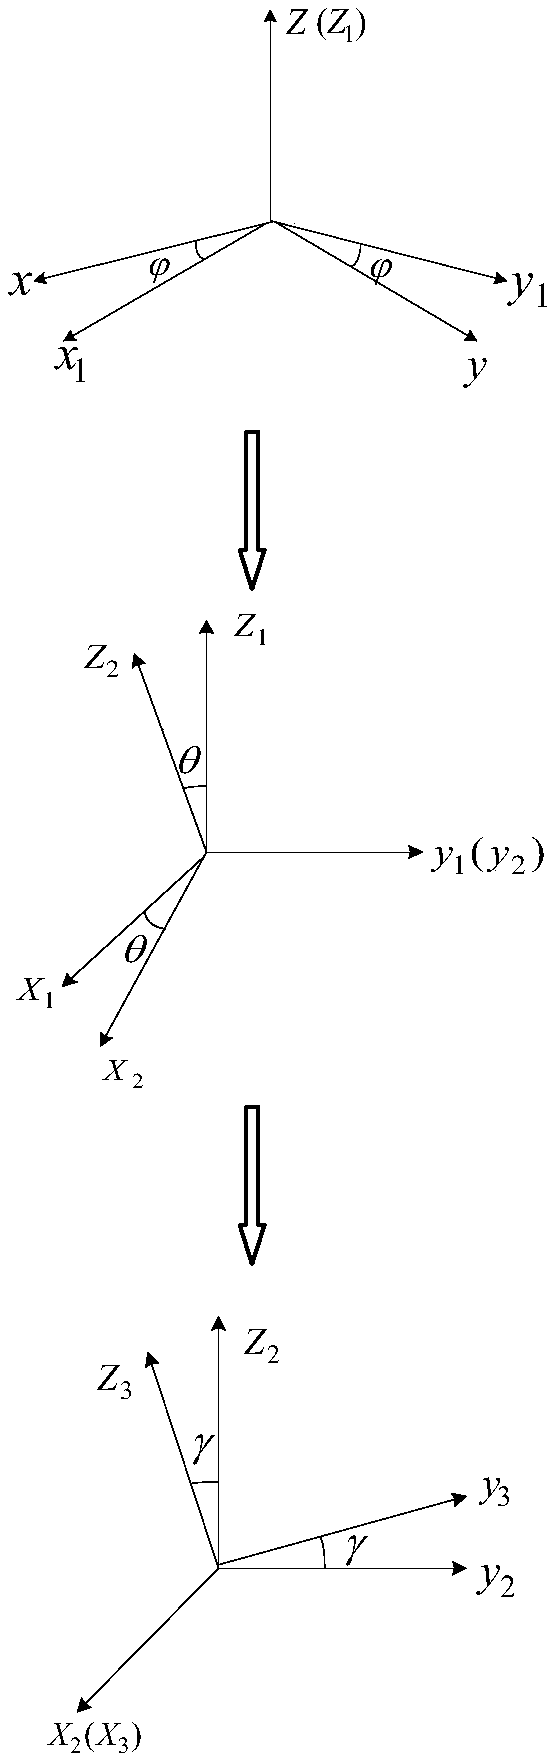 Quadrotor Attitude Calculation Method Combining Conjugate Gradient and Extended Kalman Filter